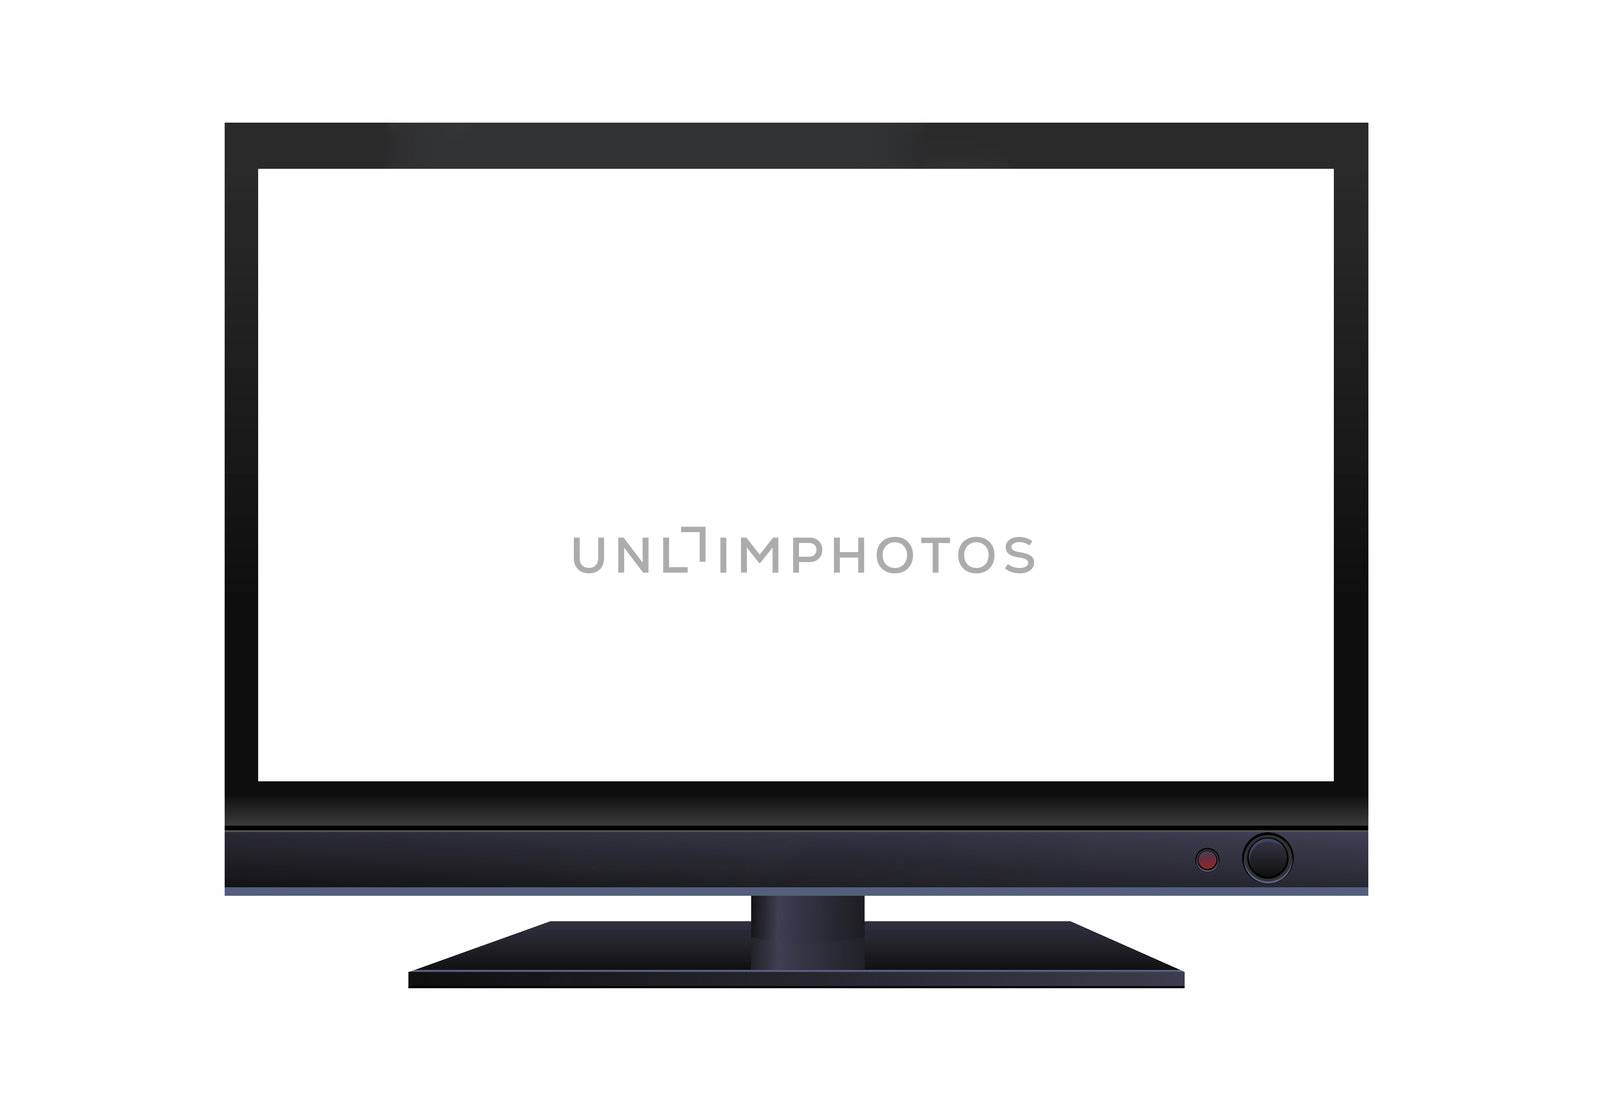 frontal view of widescreen lcd monitor isolated by ozaiachin